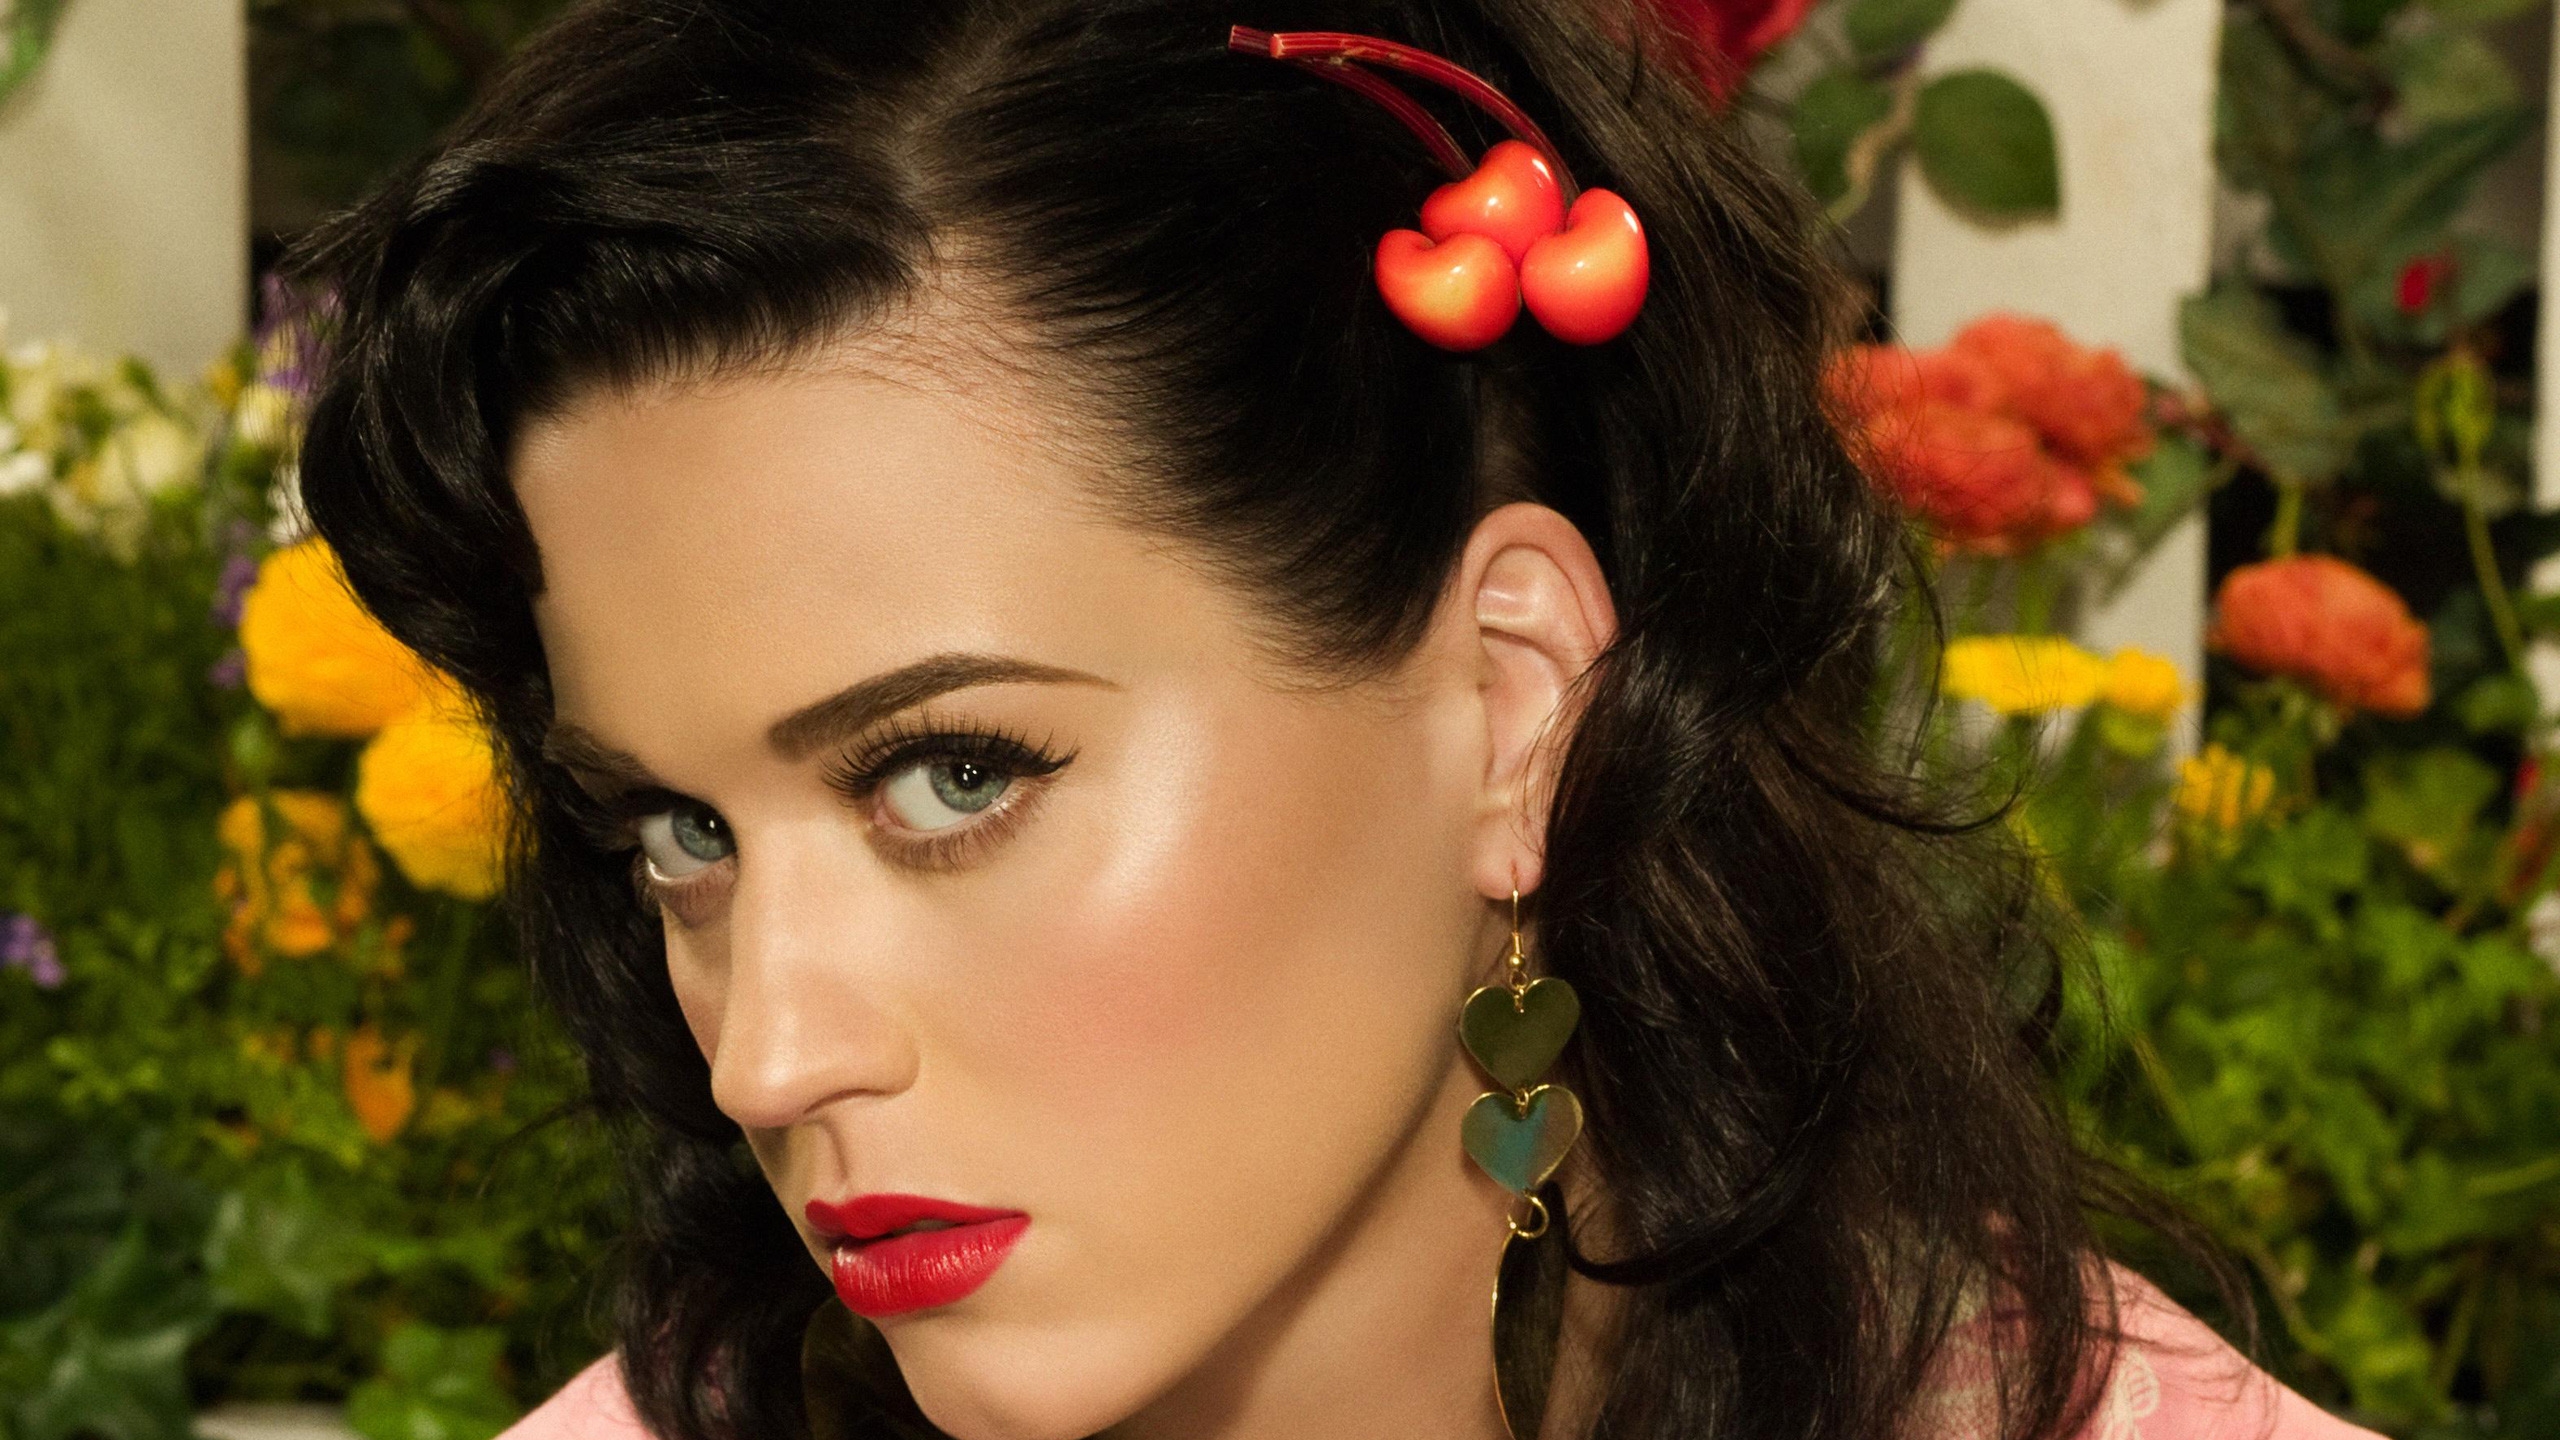 Beautiful Katy Perry for 2560x1440 HDTV resolution